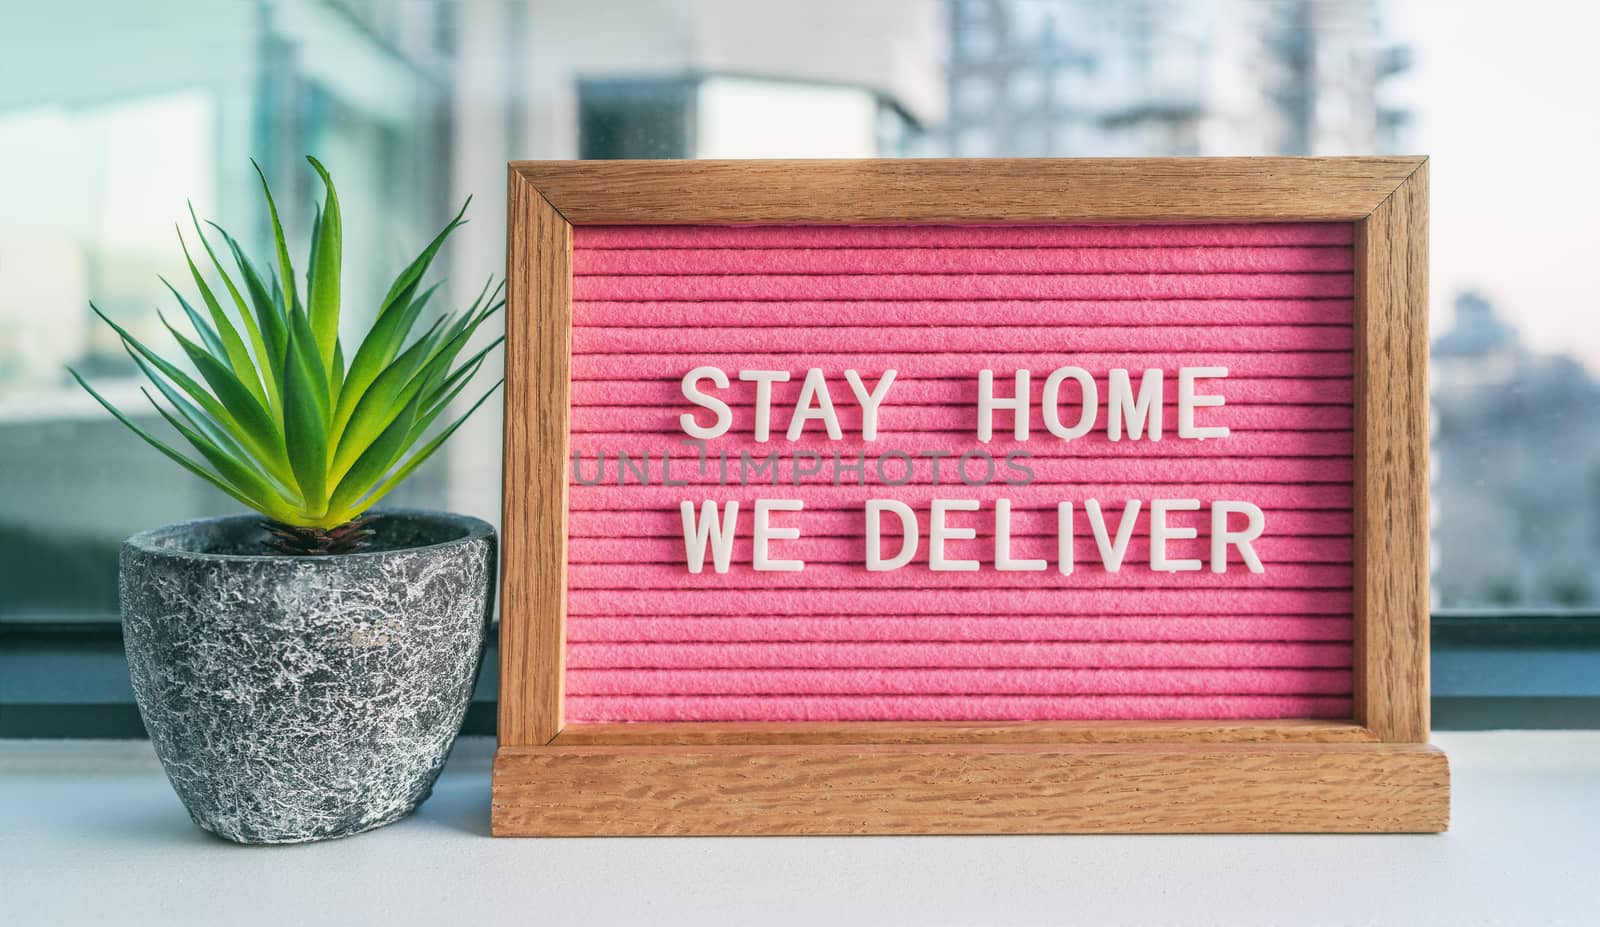 COVID-19 STAY HOME WE DELIVER Coronavirus social distancing restaurant business message sign with text offering online delivery to home, staying inside. Pink felt board with plant by Maridav